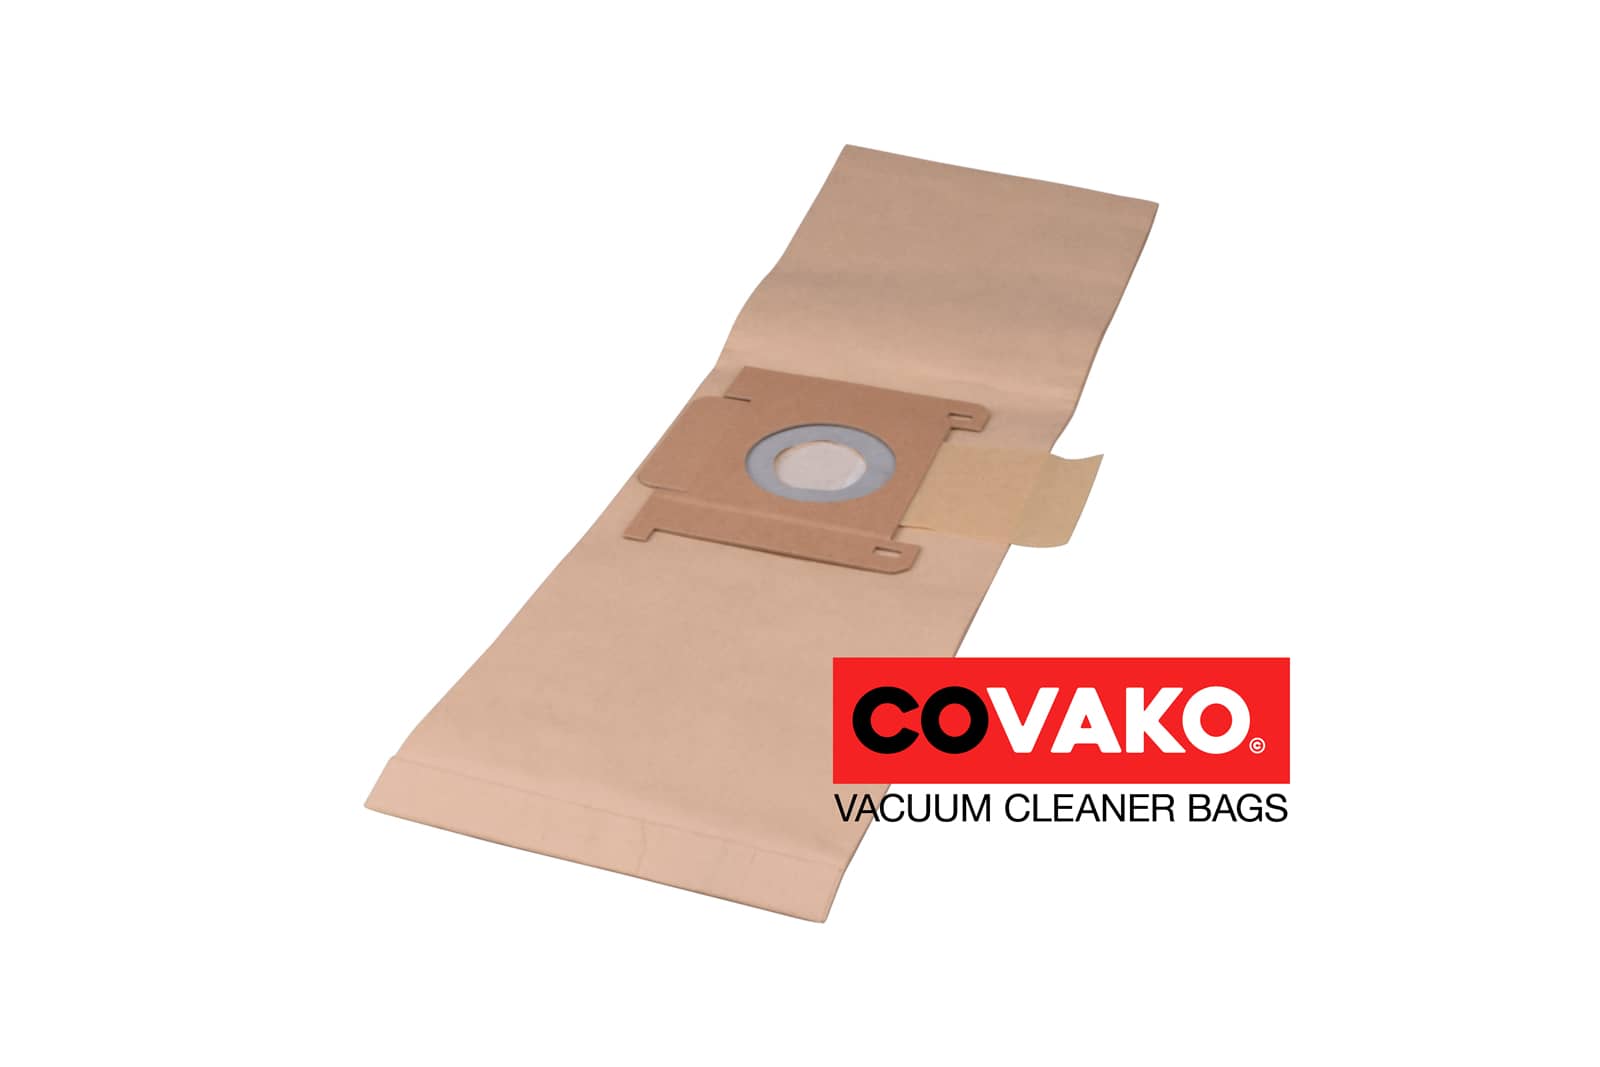 Oehme Otto i-vac C6 / Paper - Oehme Otto vacuum cleaner bags